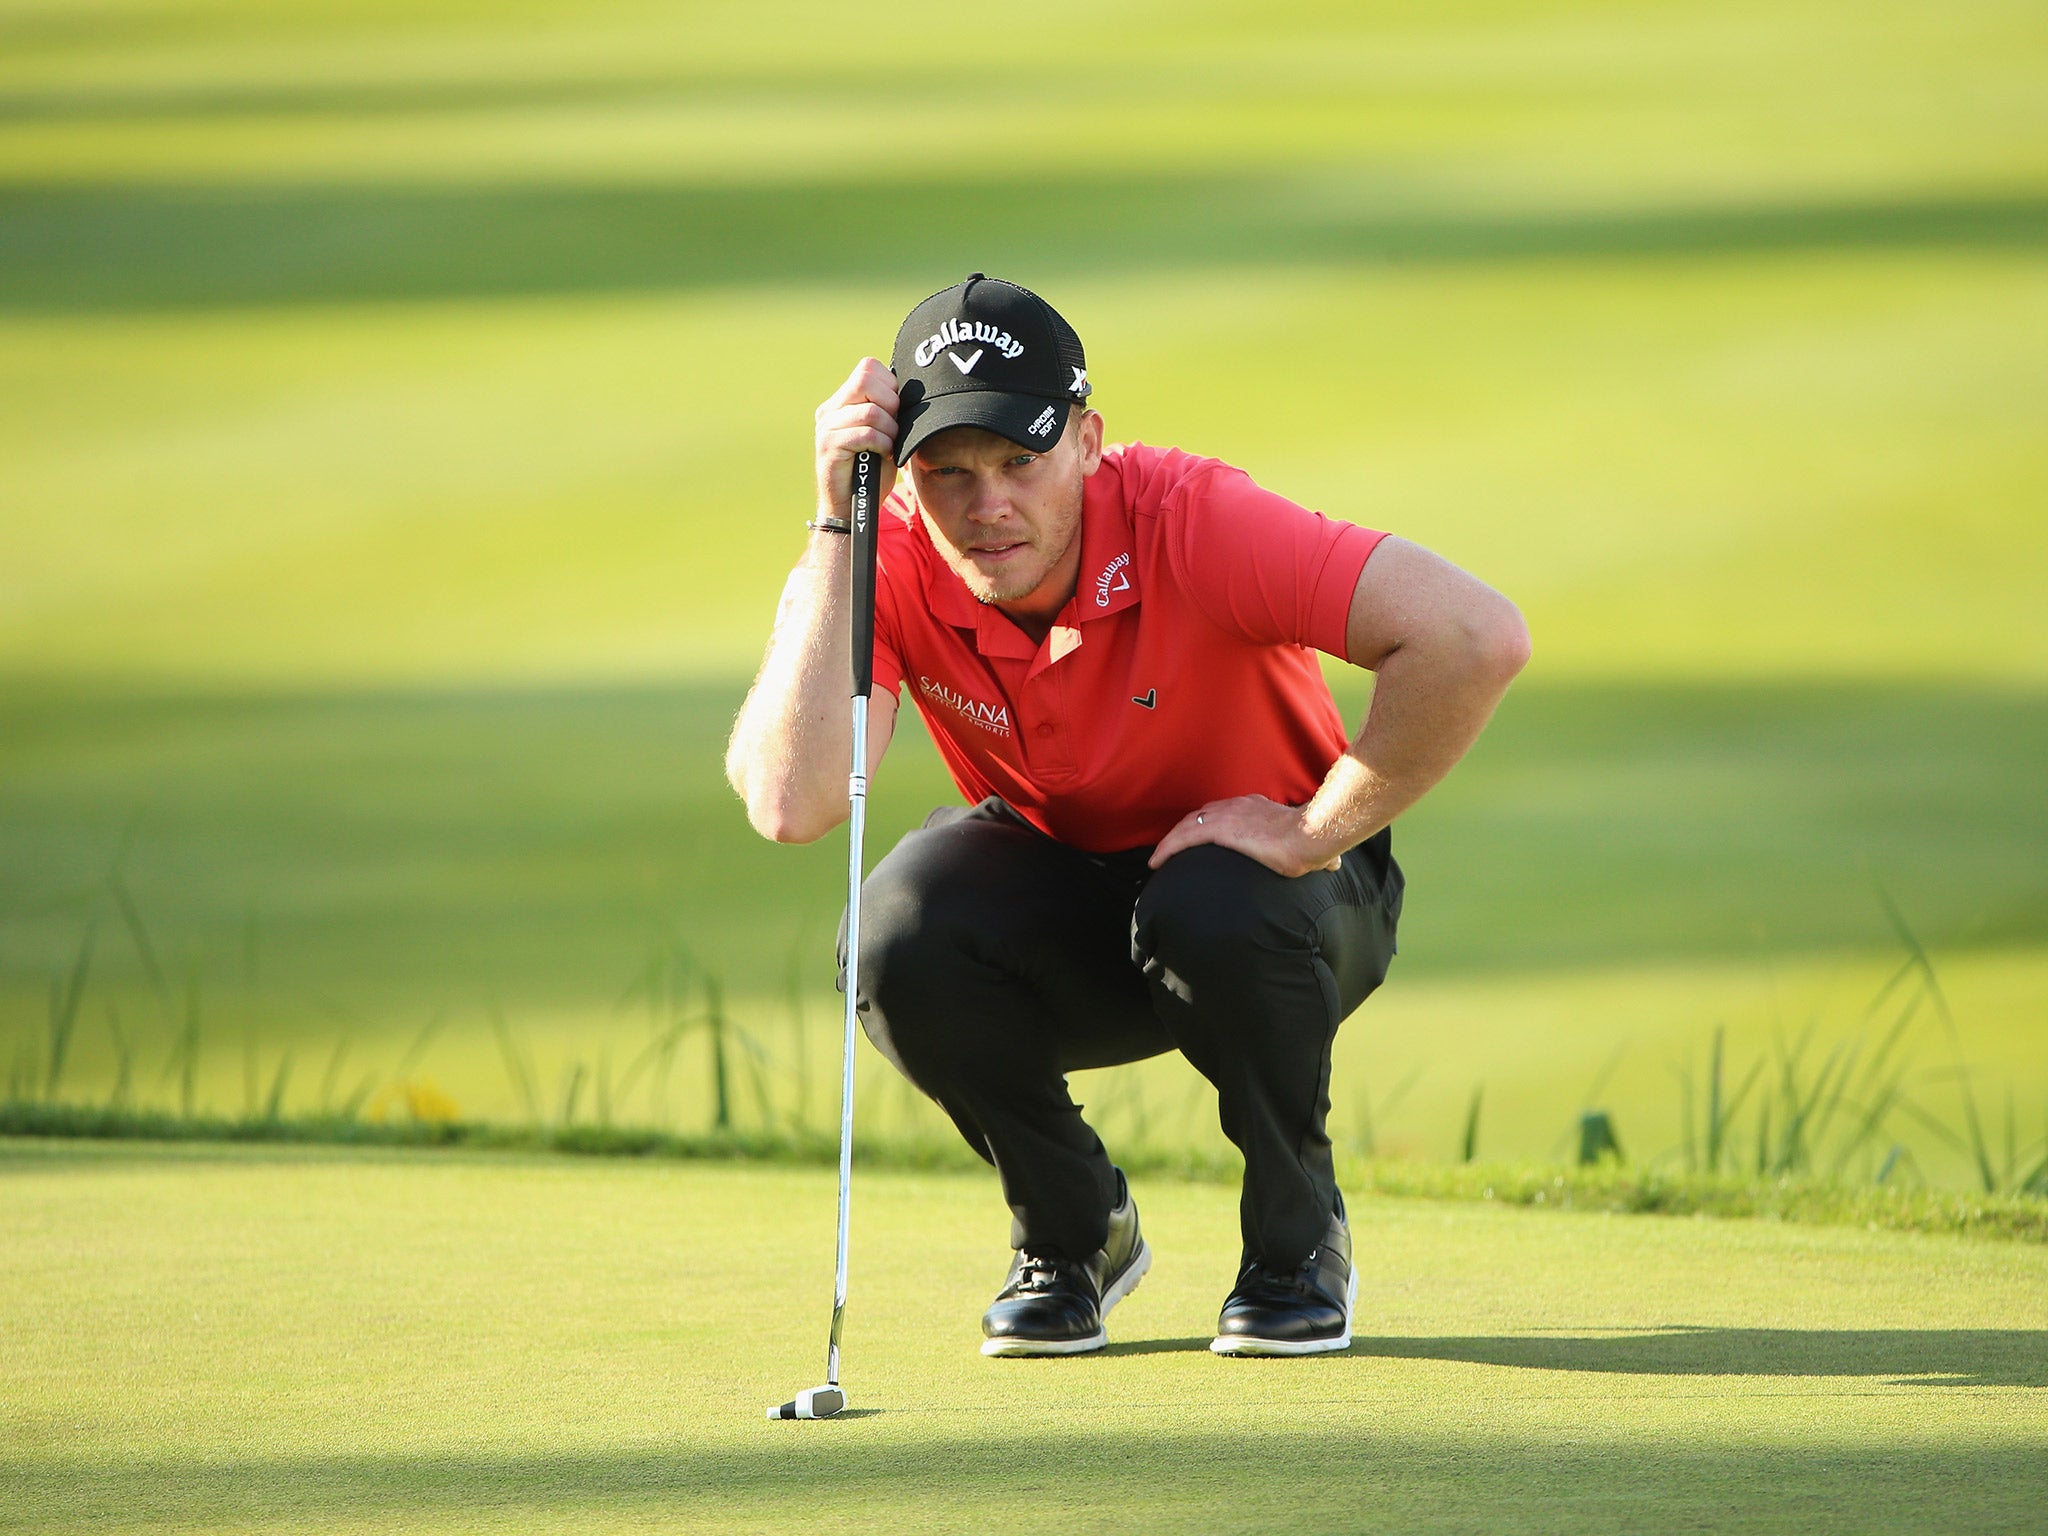 Danny Willett had a mixed second day at the BMW PGA Championship